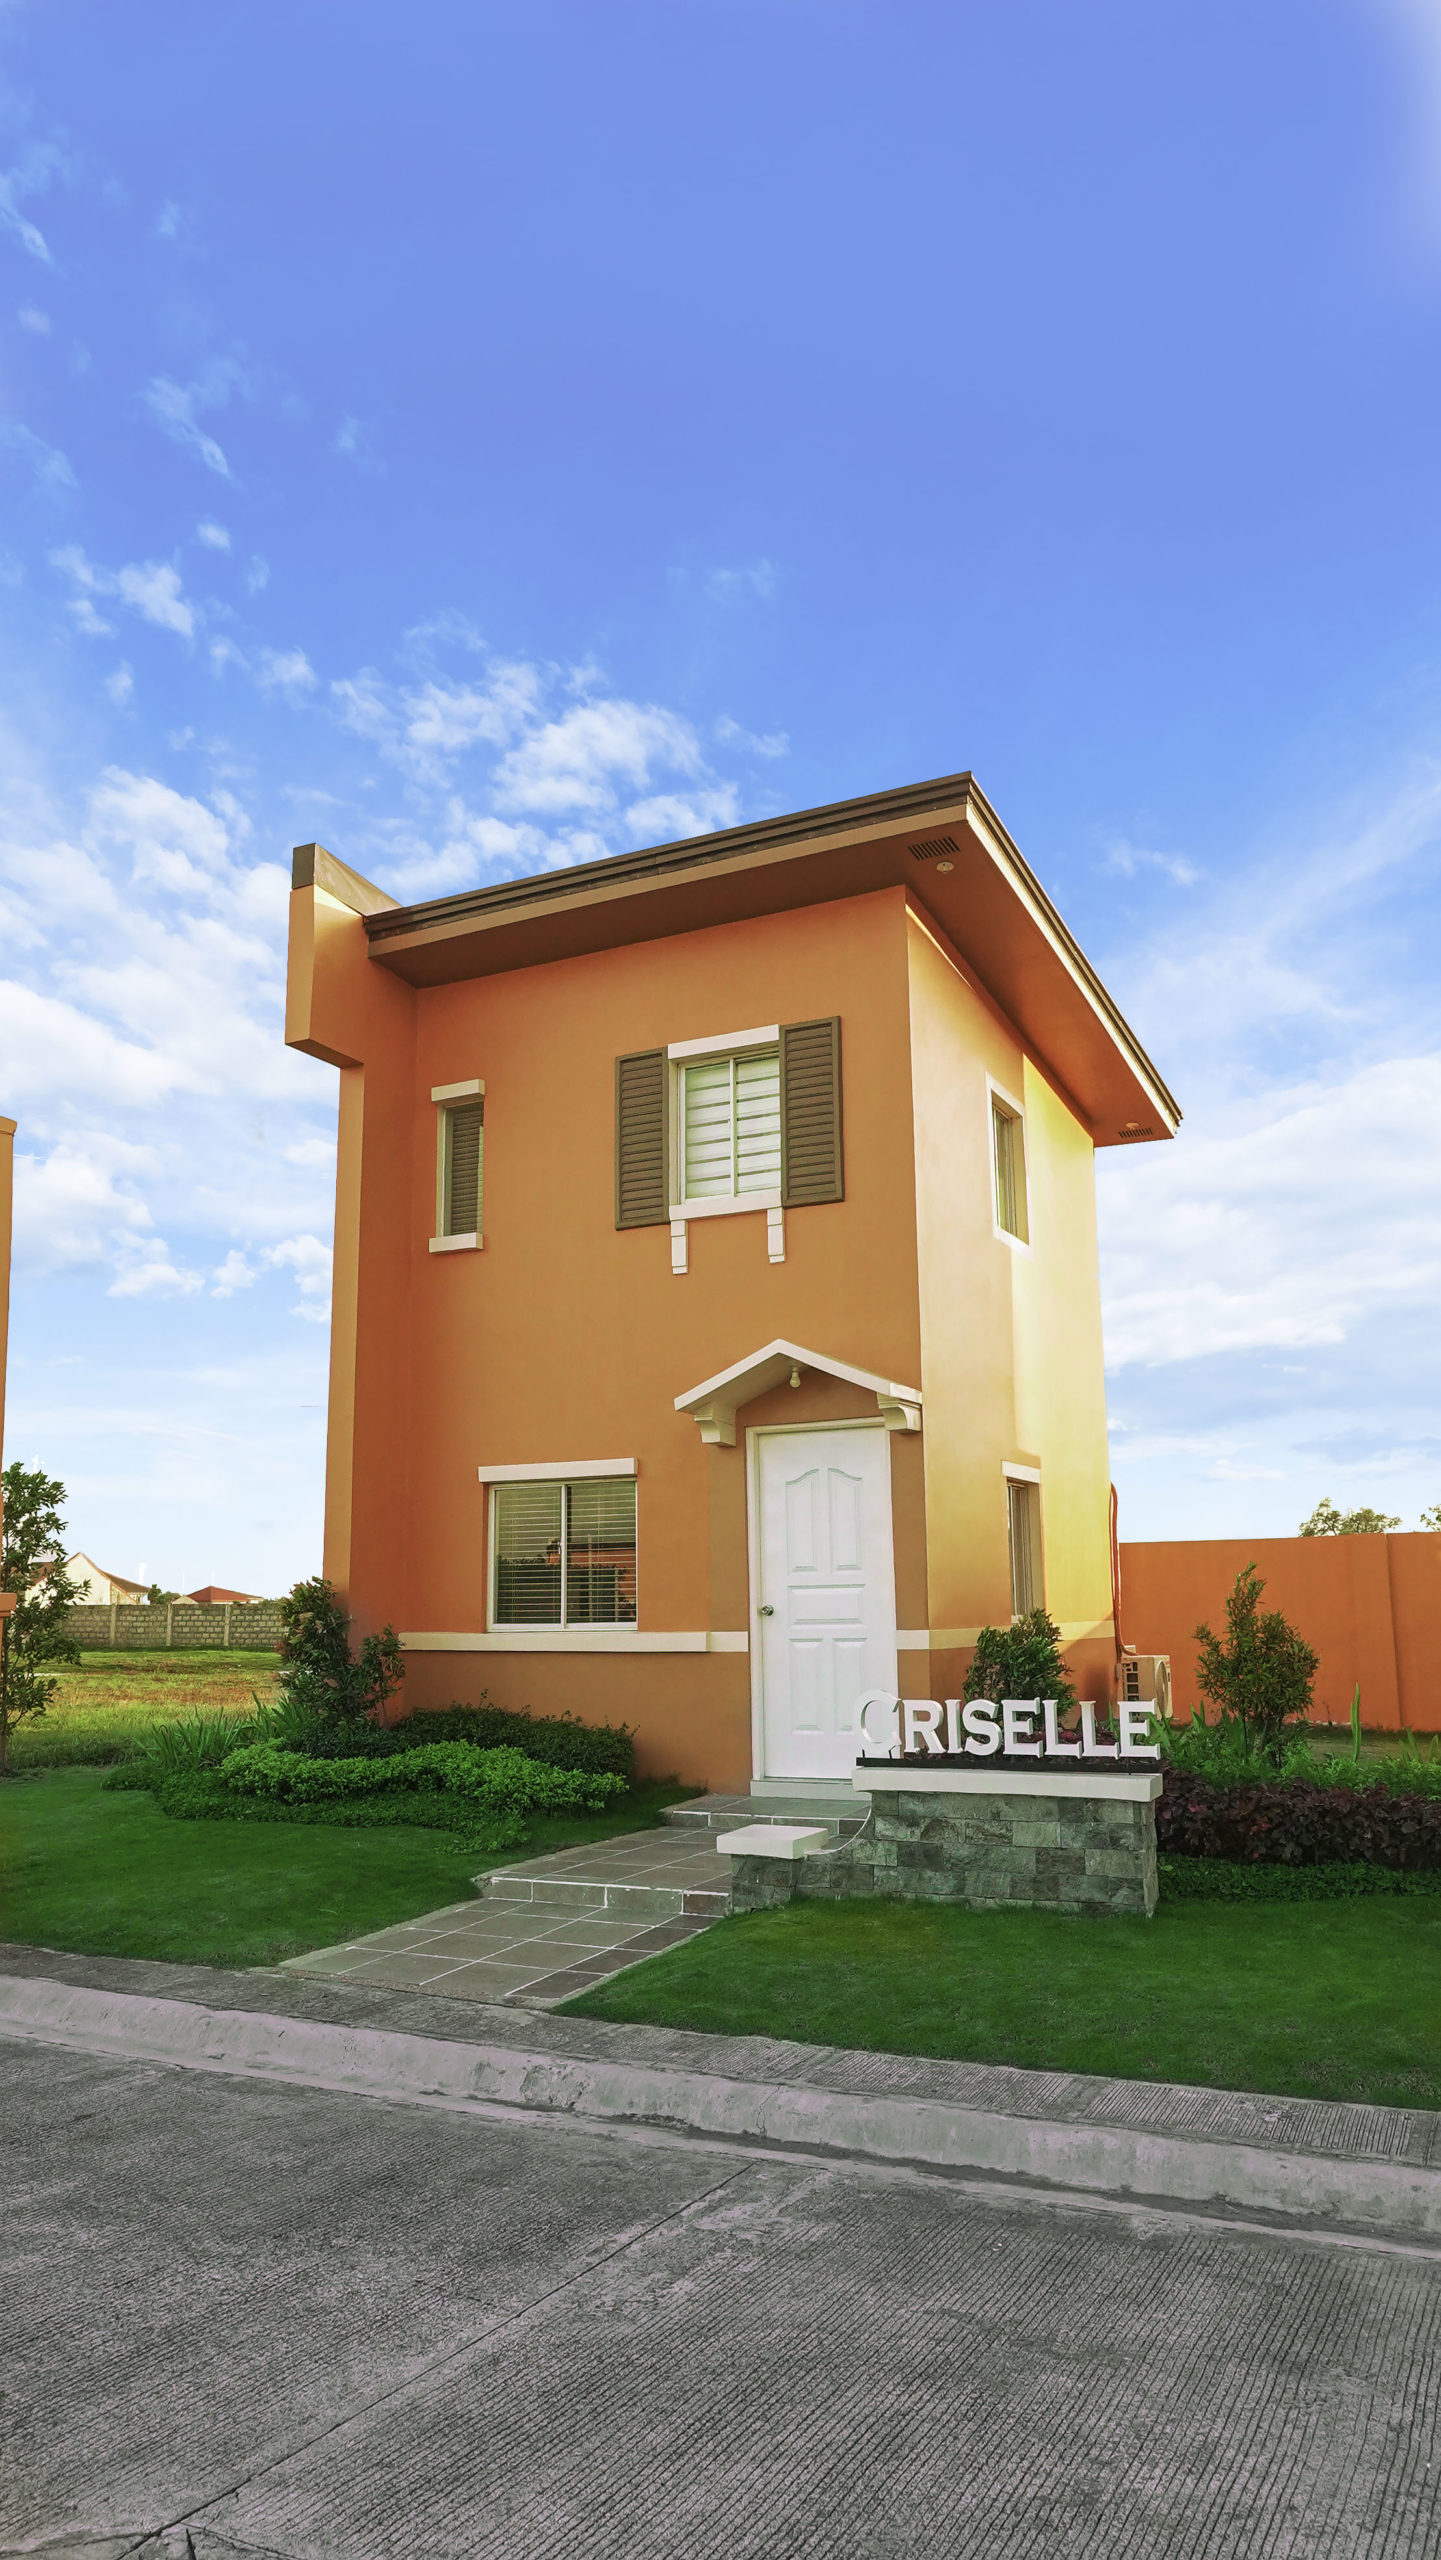 Affordable house and lot in Cabanatauan City Criselle unit 73 Lot area